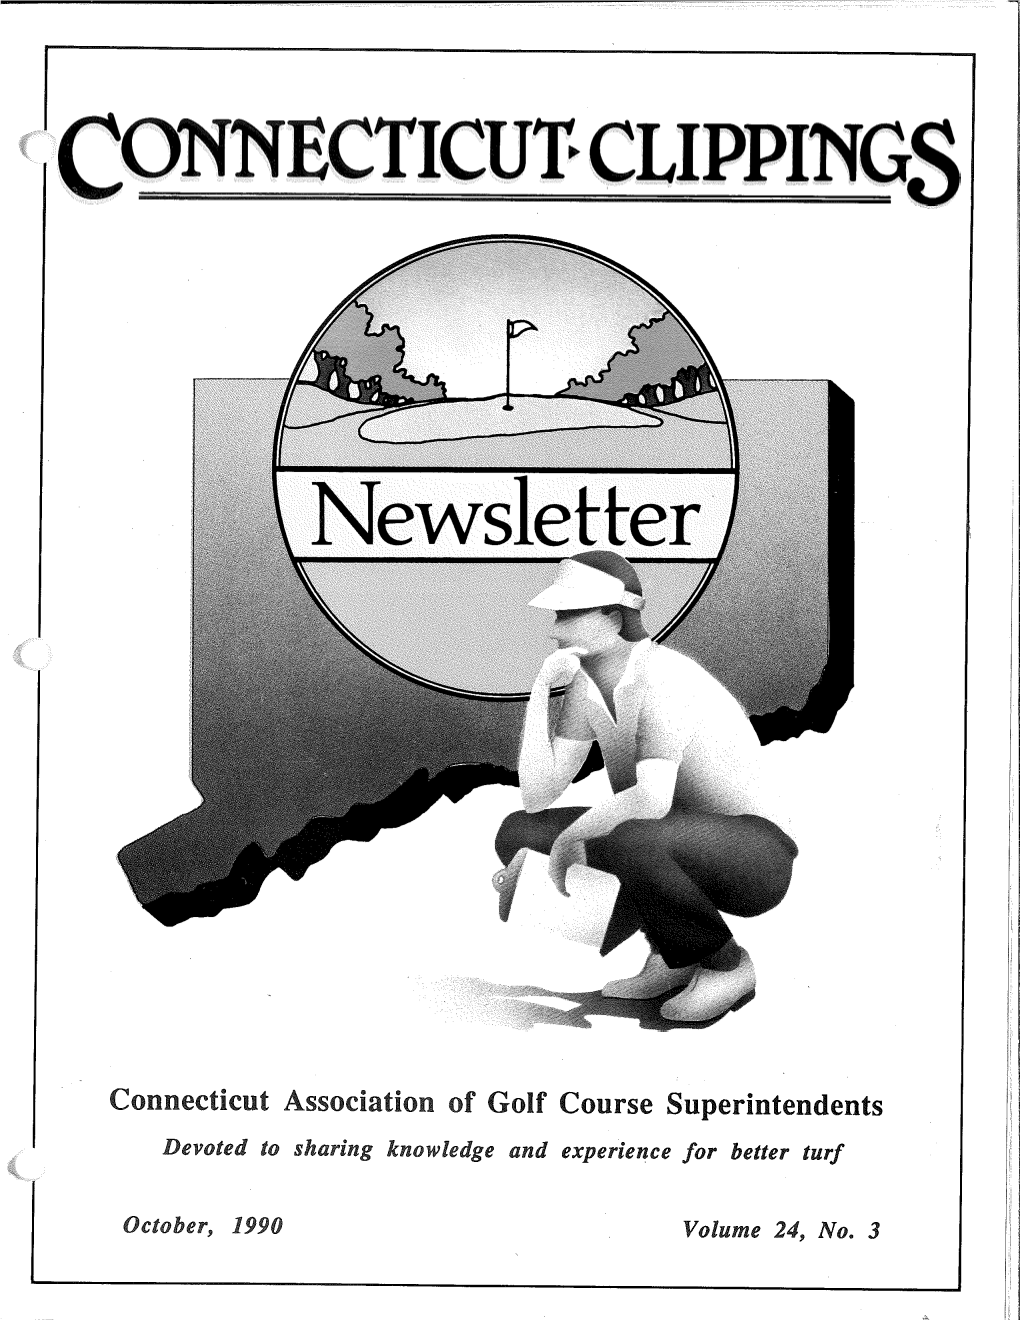 Connecticut Association of Golf Course Superintendents Devoted to Sharing Knowledge and Experience for Better Turf